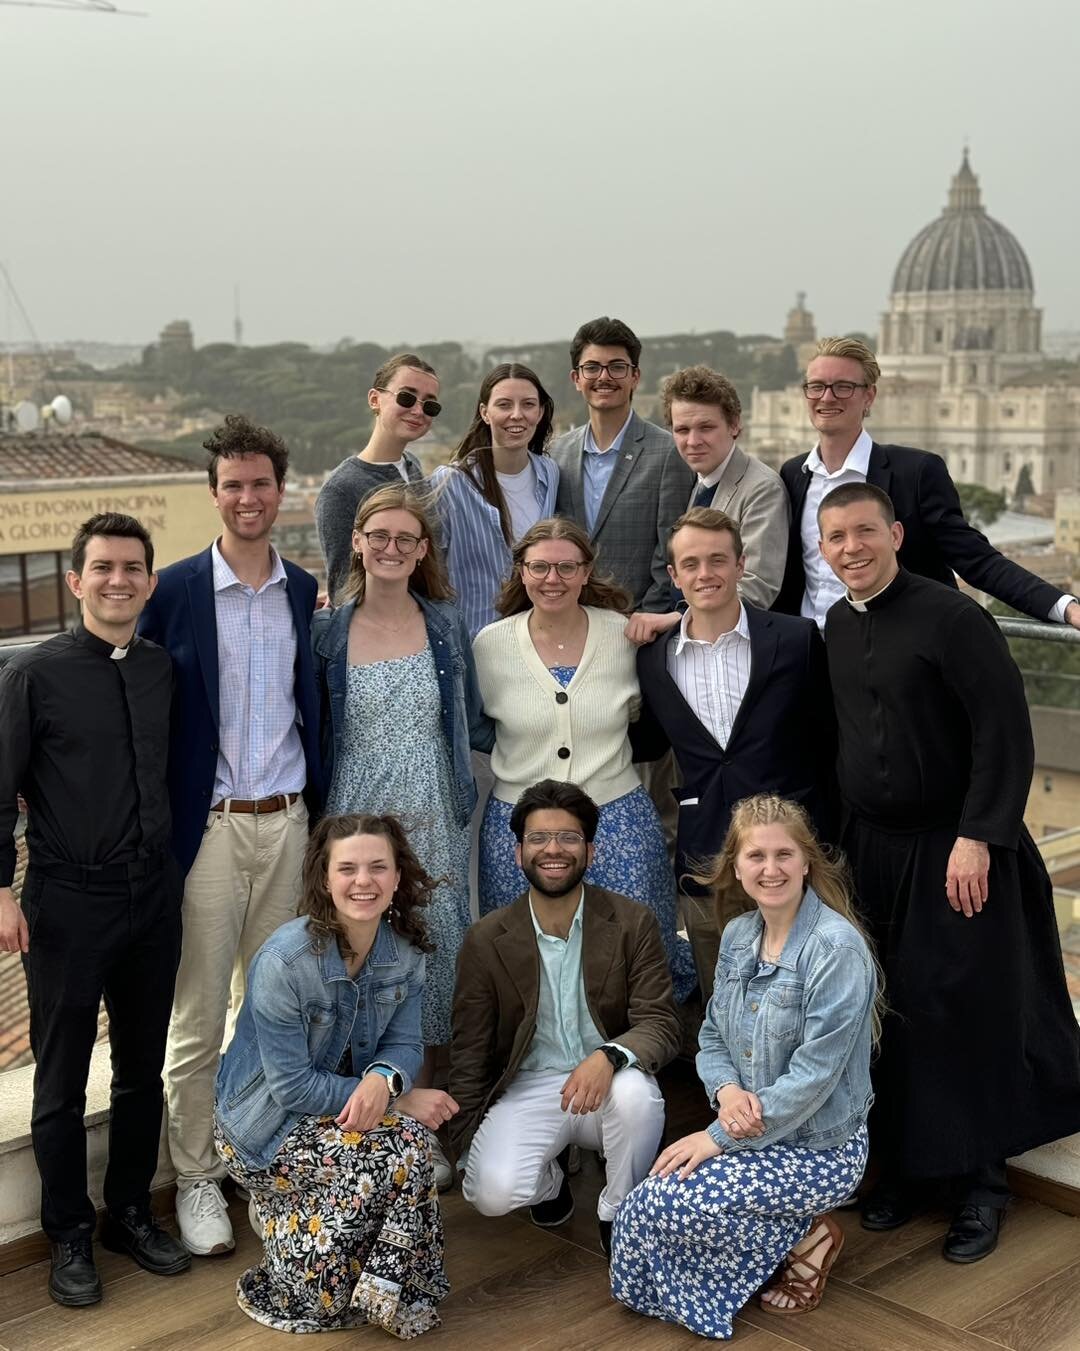 Fr Paul led University of Denver students on a pilgrimage to Rome during Holy Week and the Triduum. This photo is from Easter Sunday after Mass at St Peter&rsquo;s Basilica with Pope Francis.